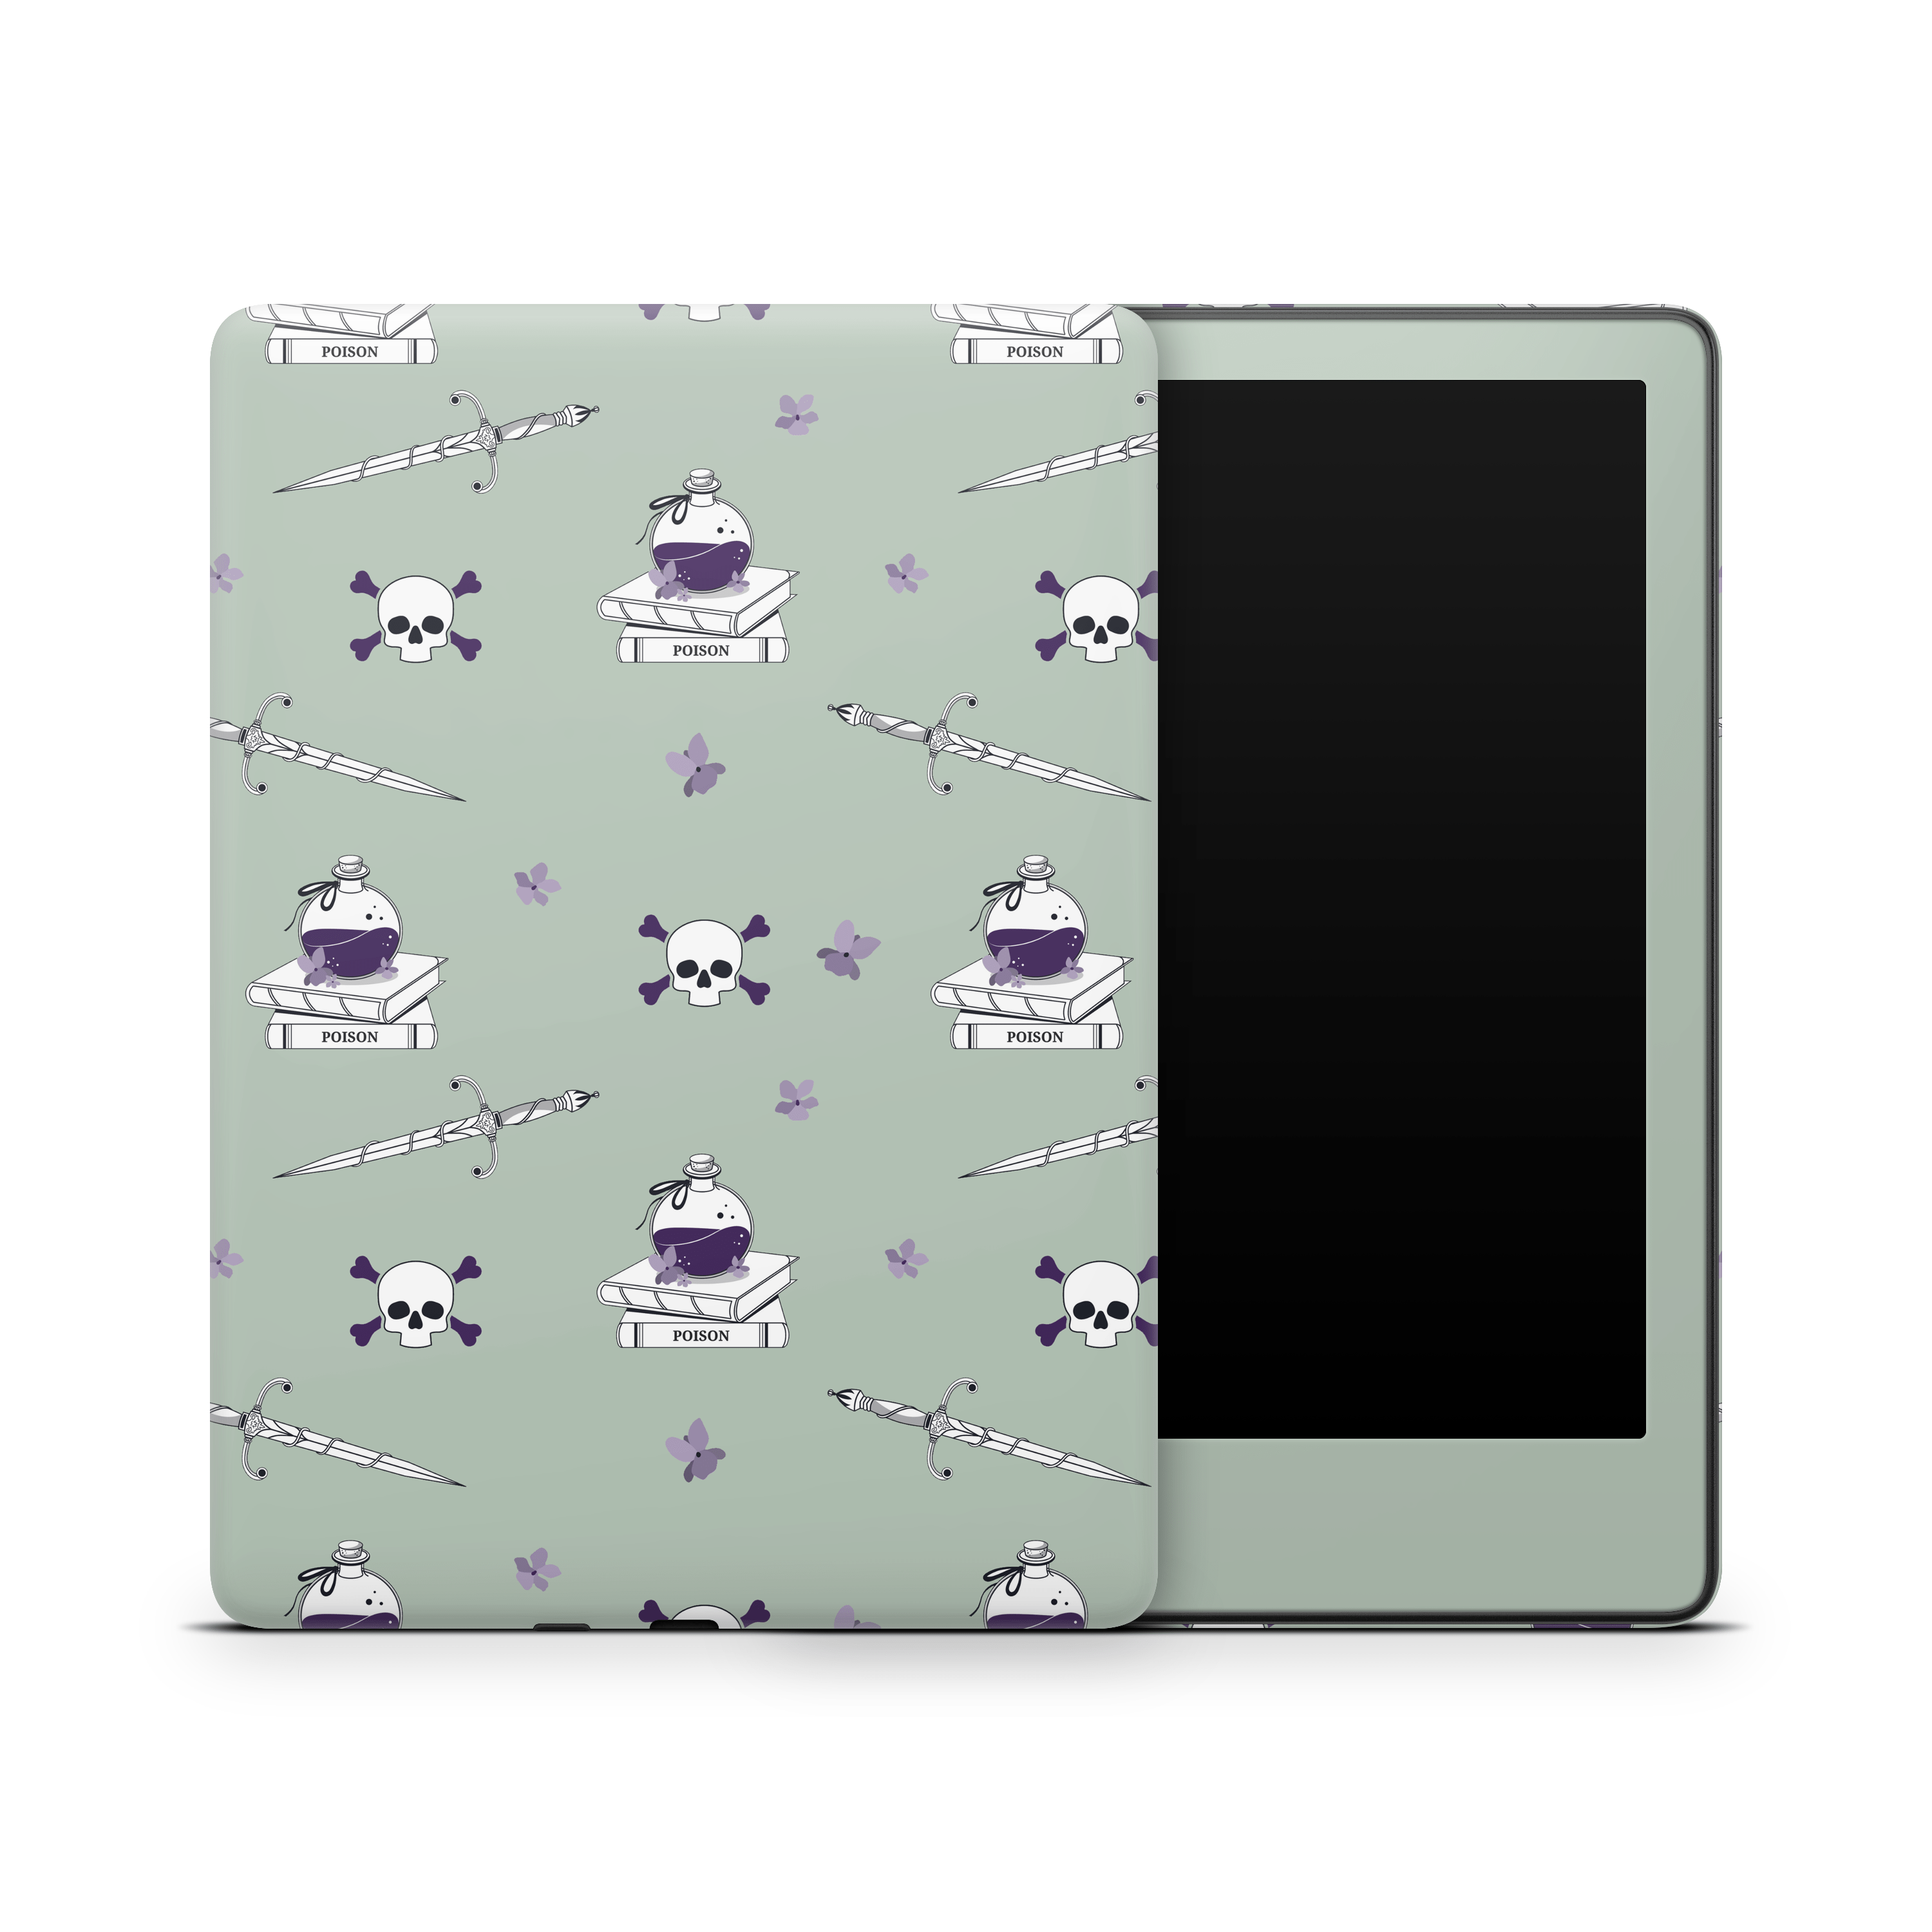 Poison Master (Green) Kindle Skins | Fourth Wing Officially Licensed